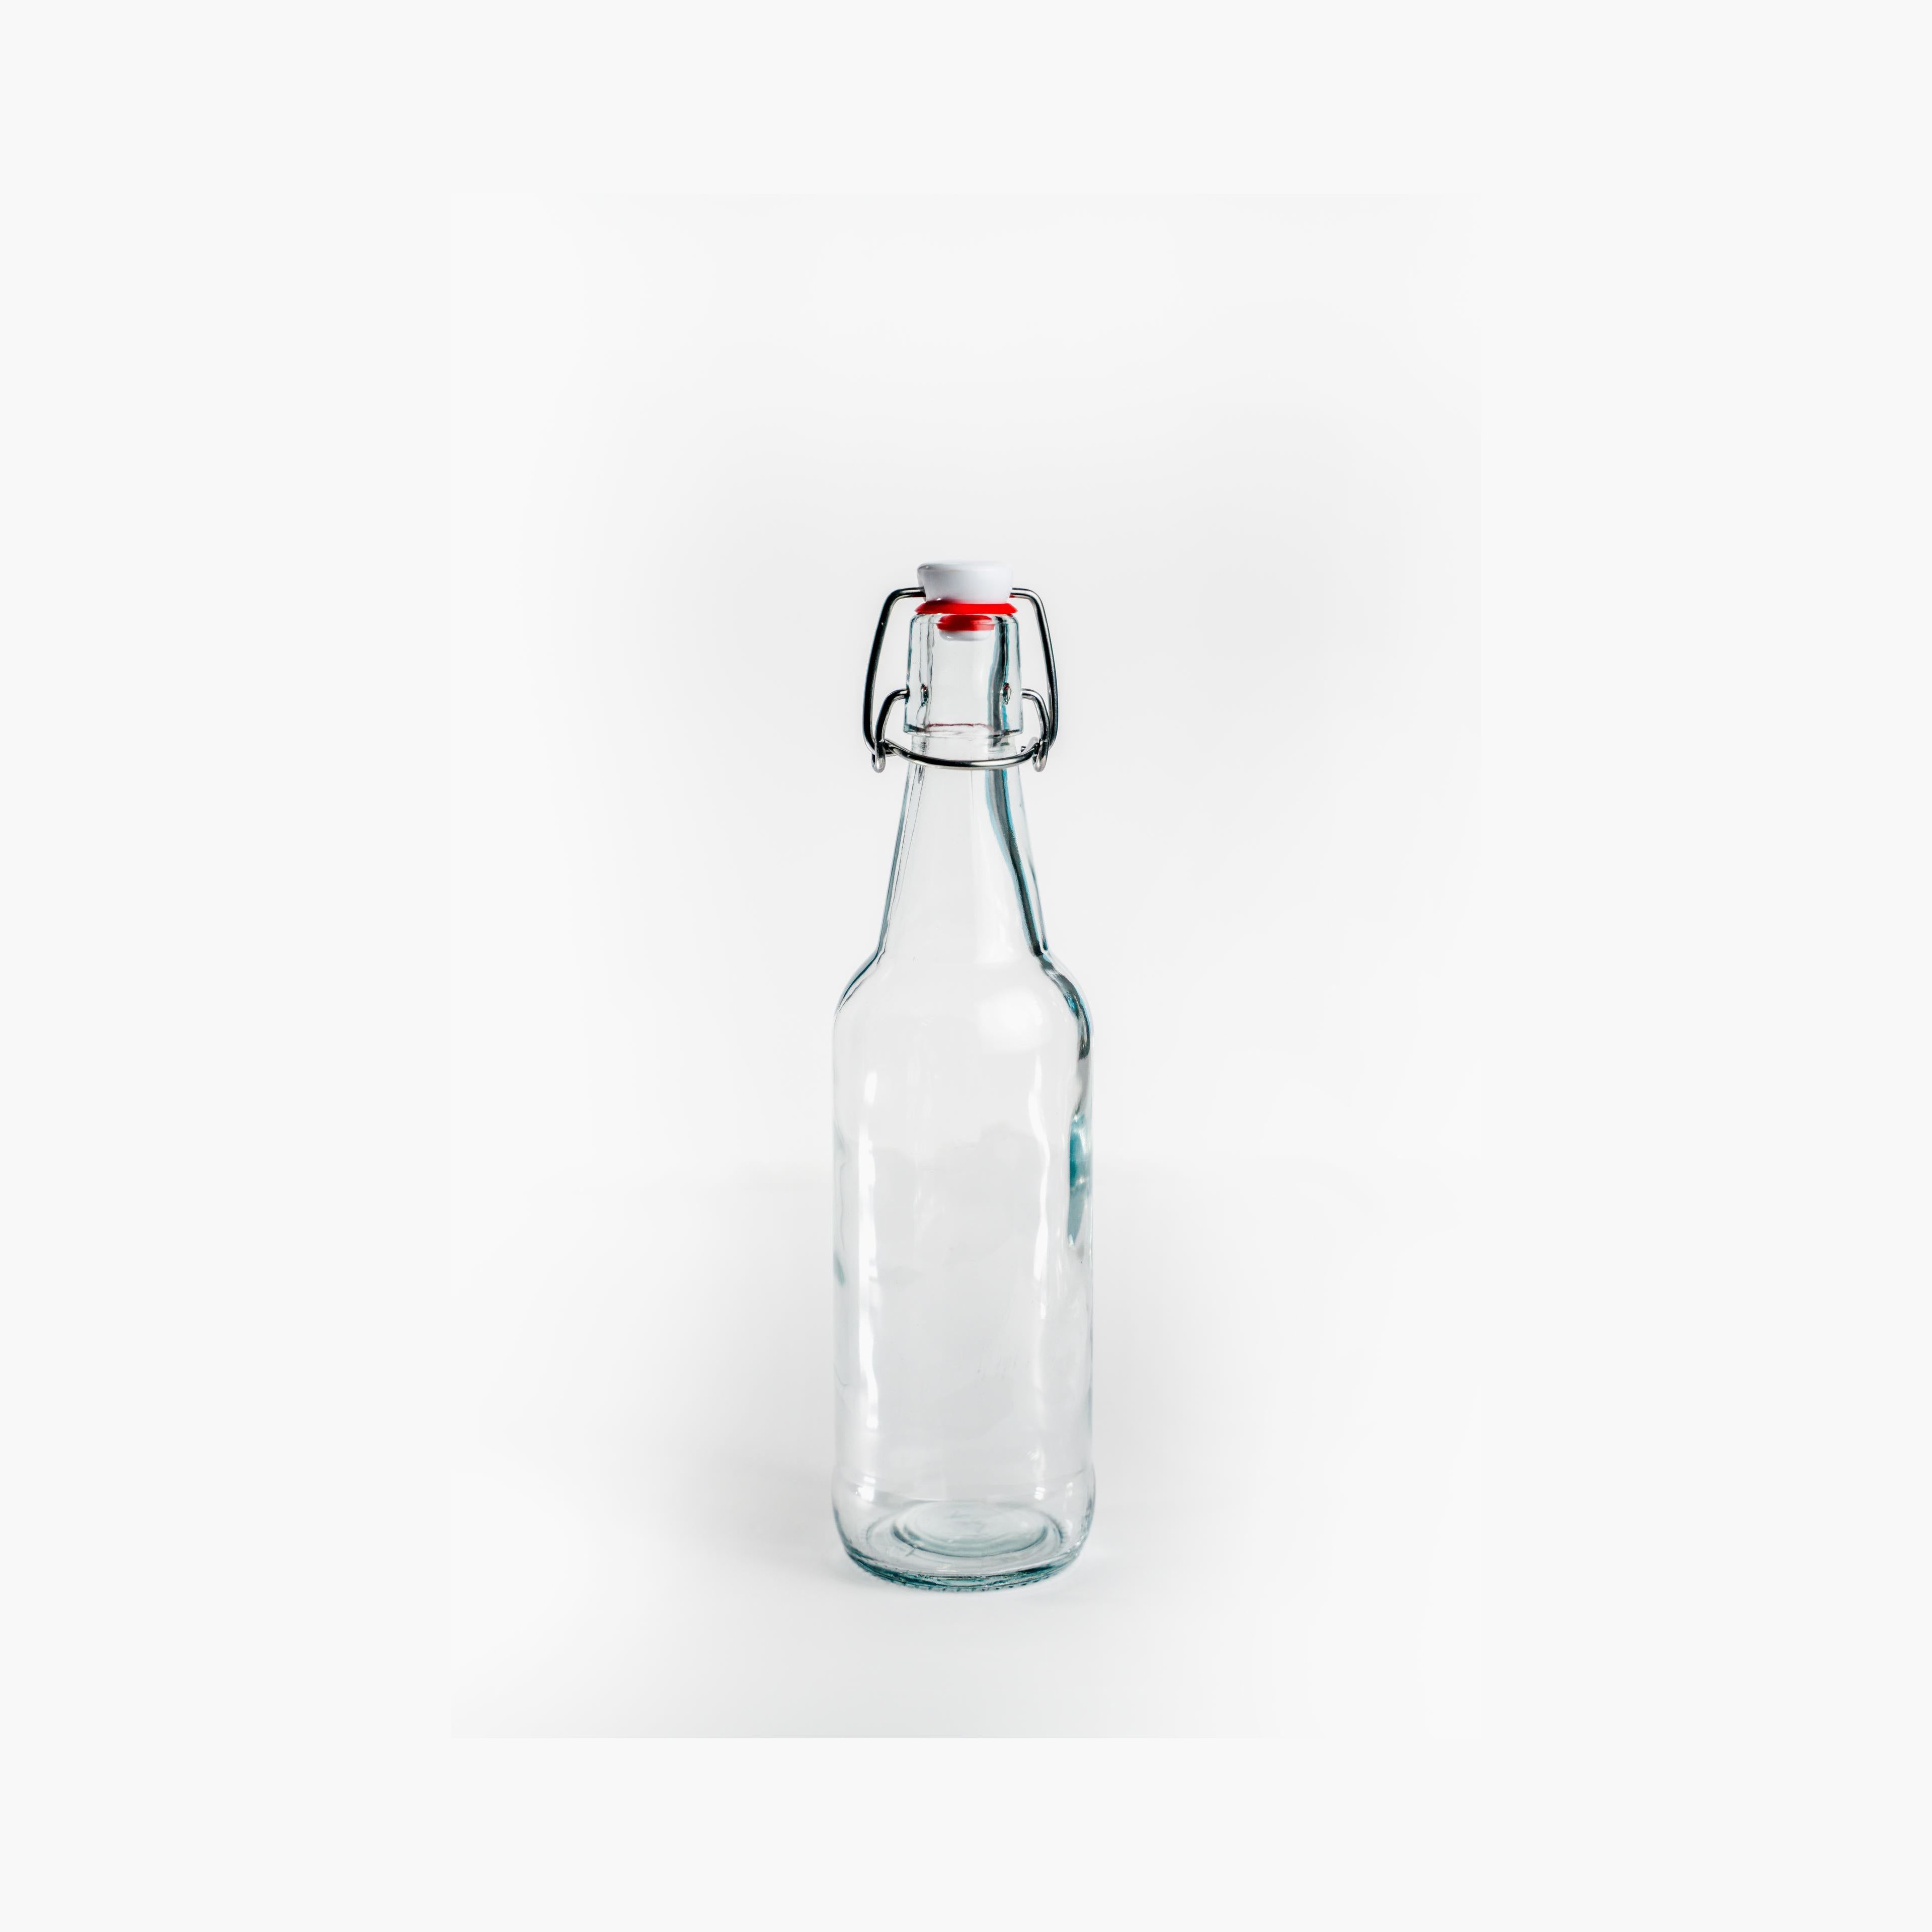 Flip Top Glass Bottles - Pack of Six 6 with Rubber Funnel